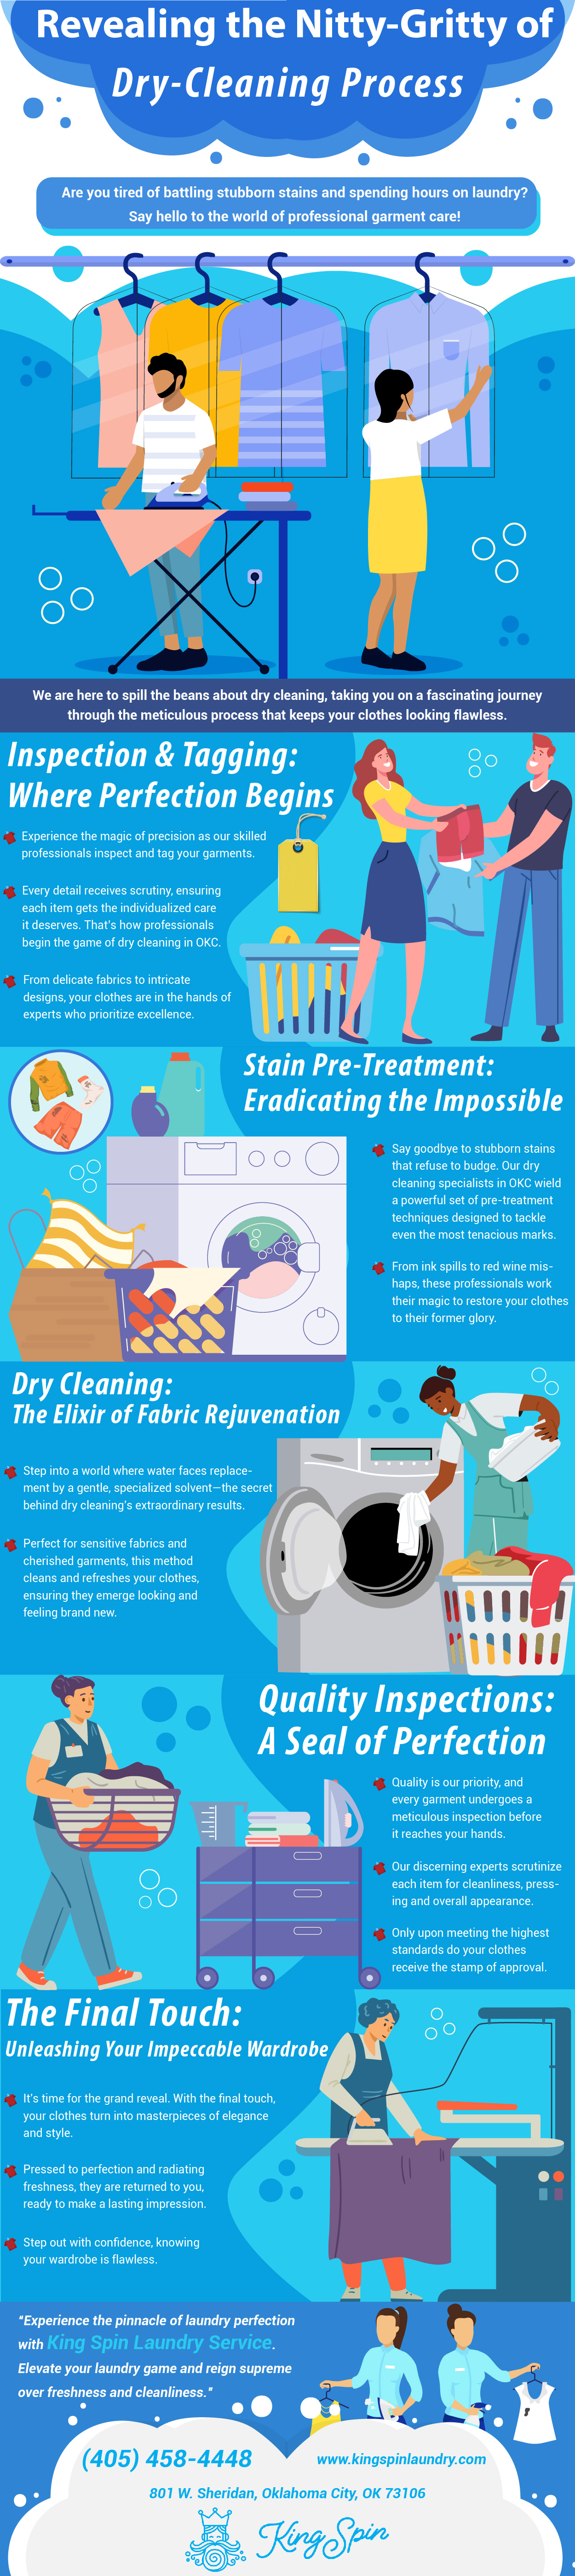 Dry-Cleaning process infographic